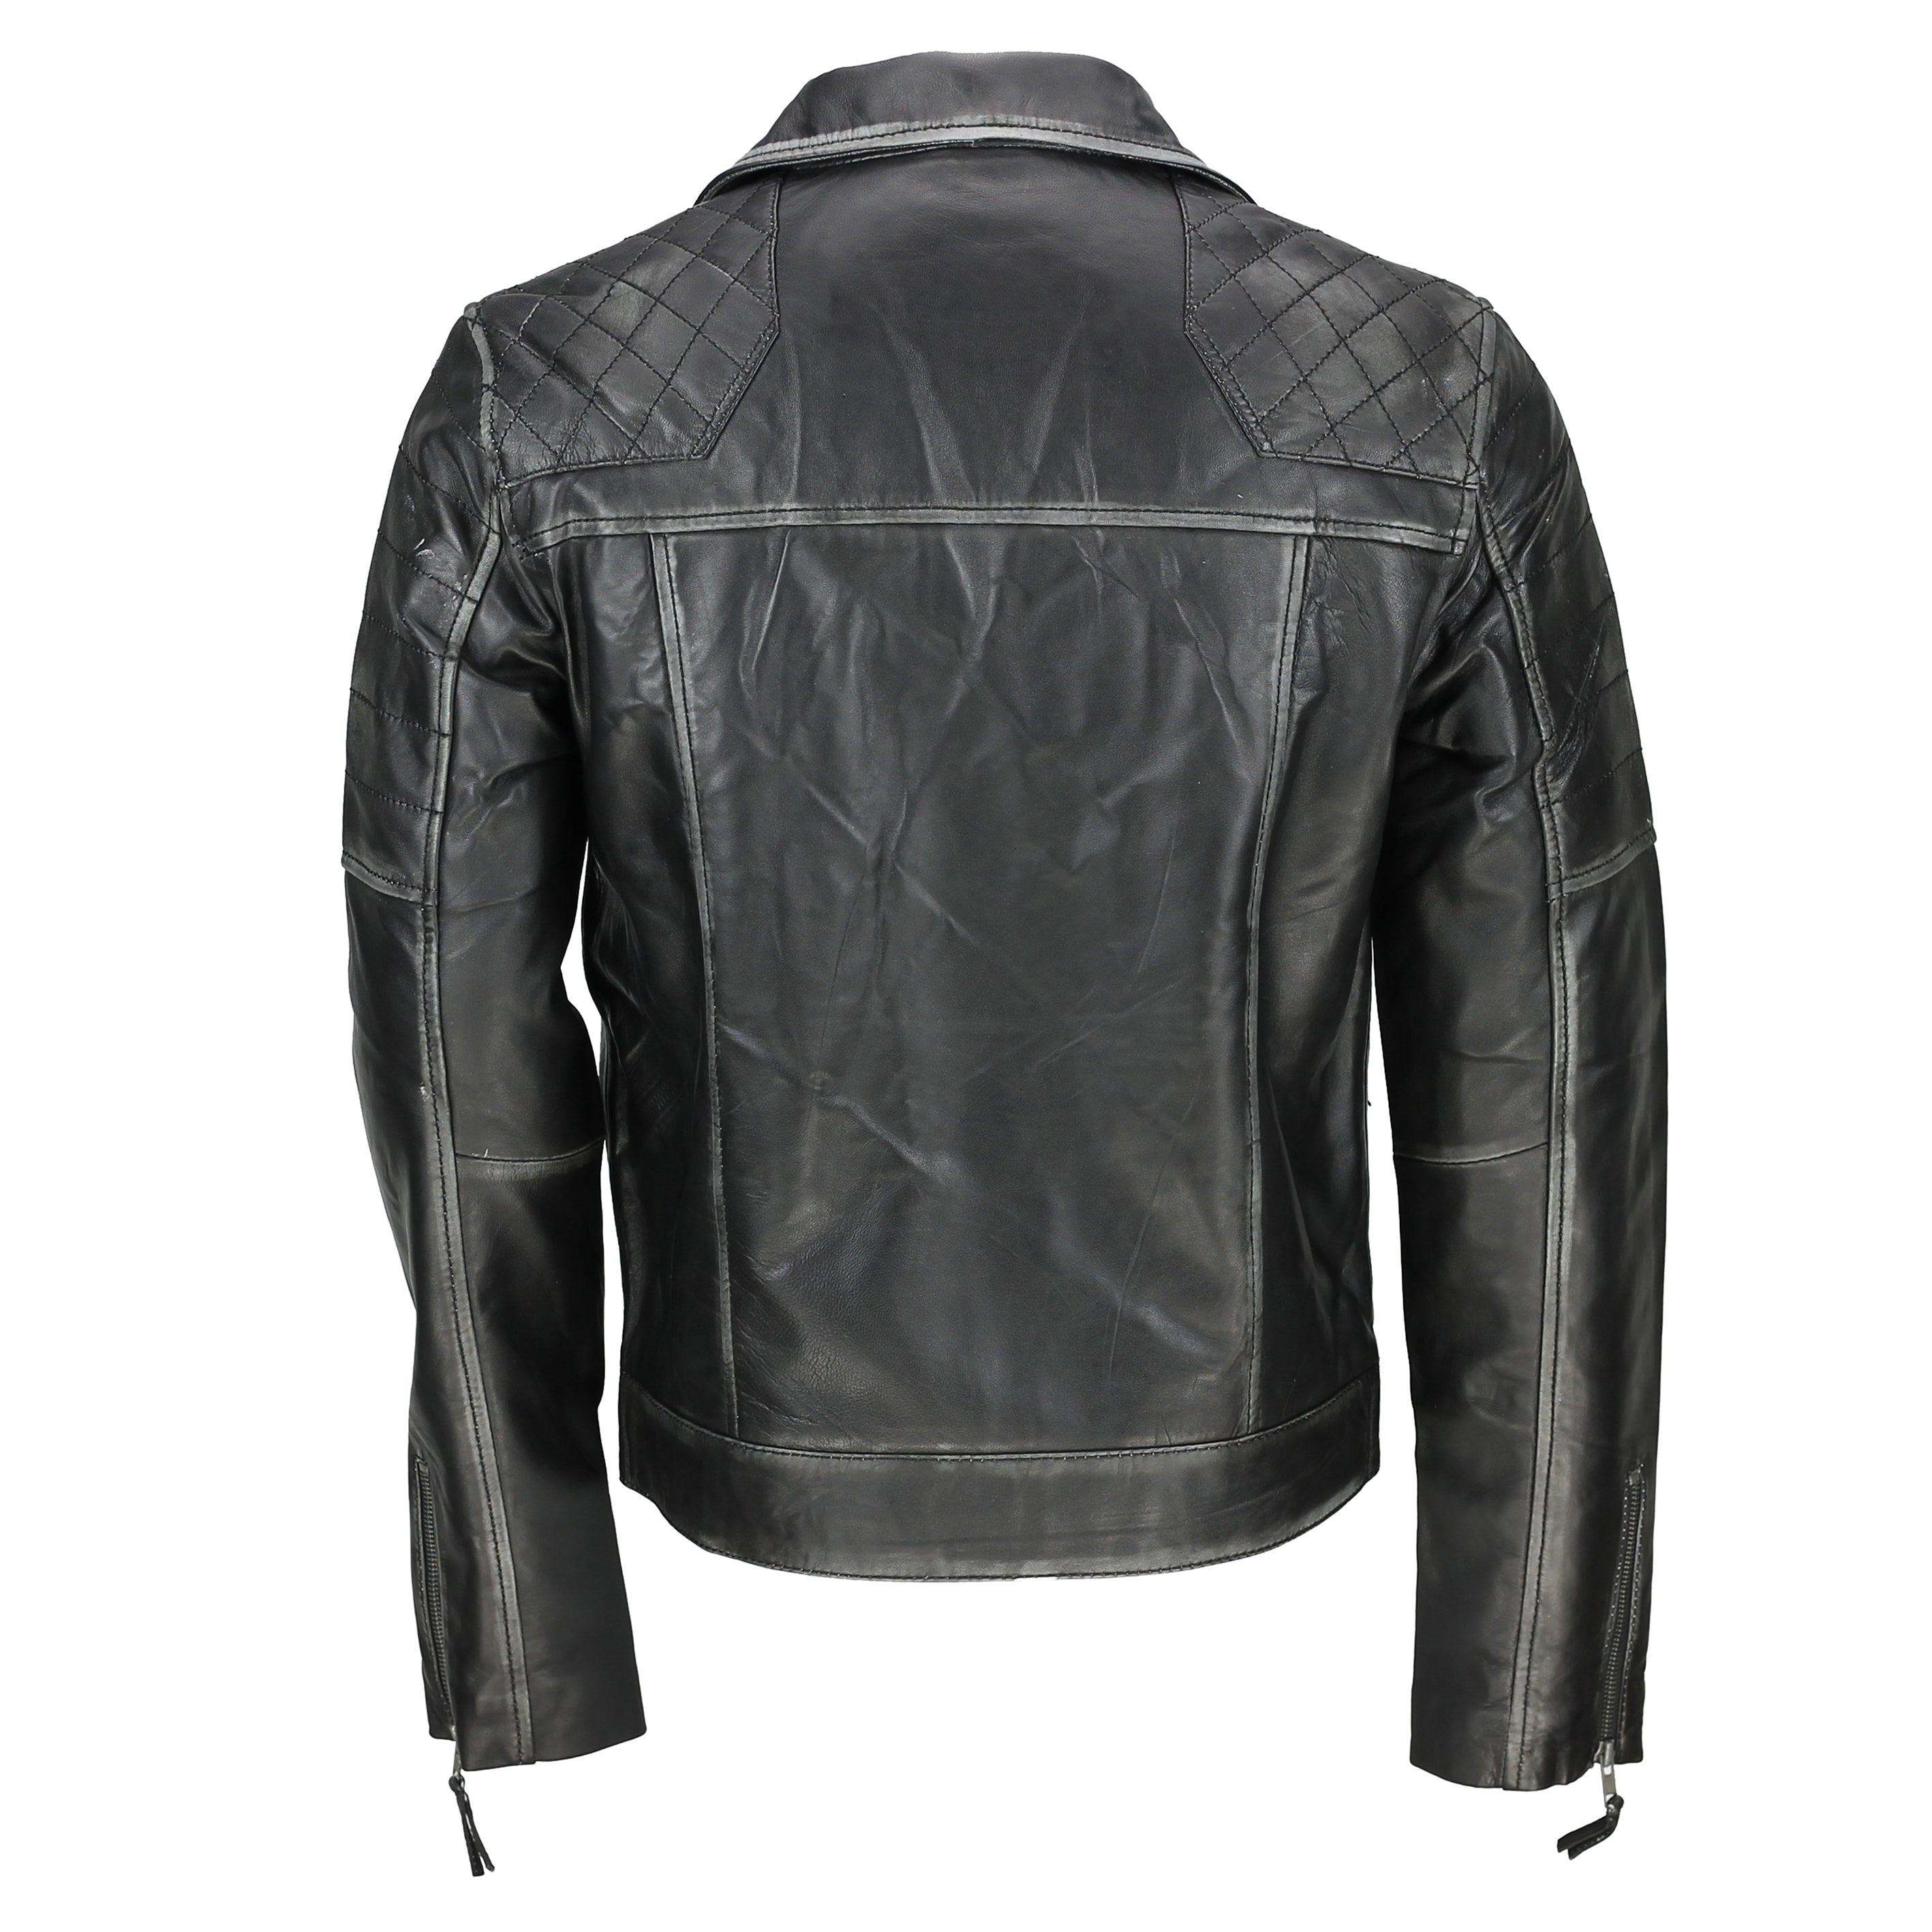 Mens Black Real Leather Biker Style Jacket Vintage Rubbed off Edges Zipped Retro